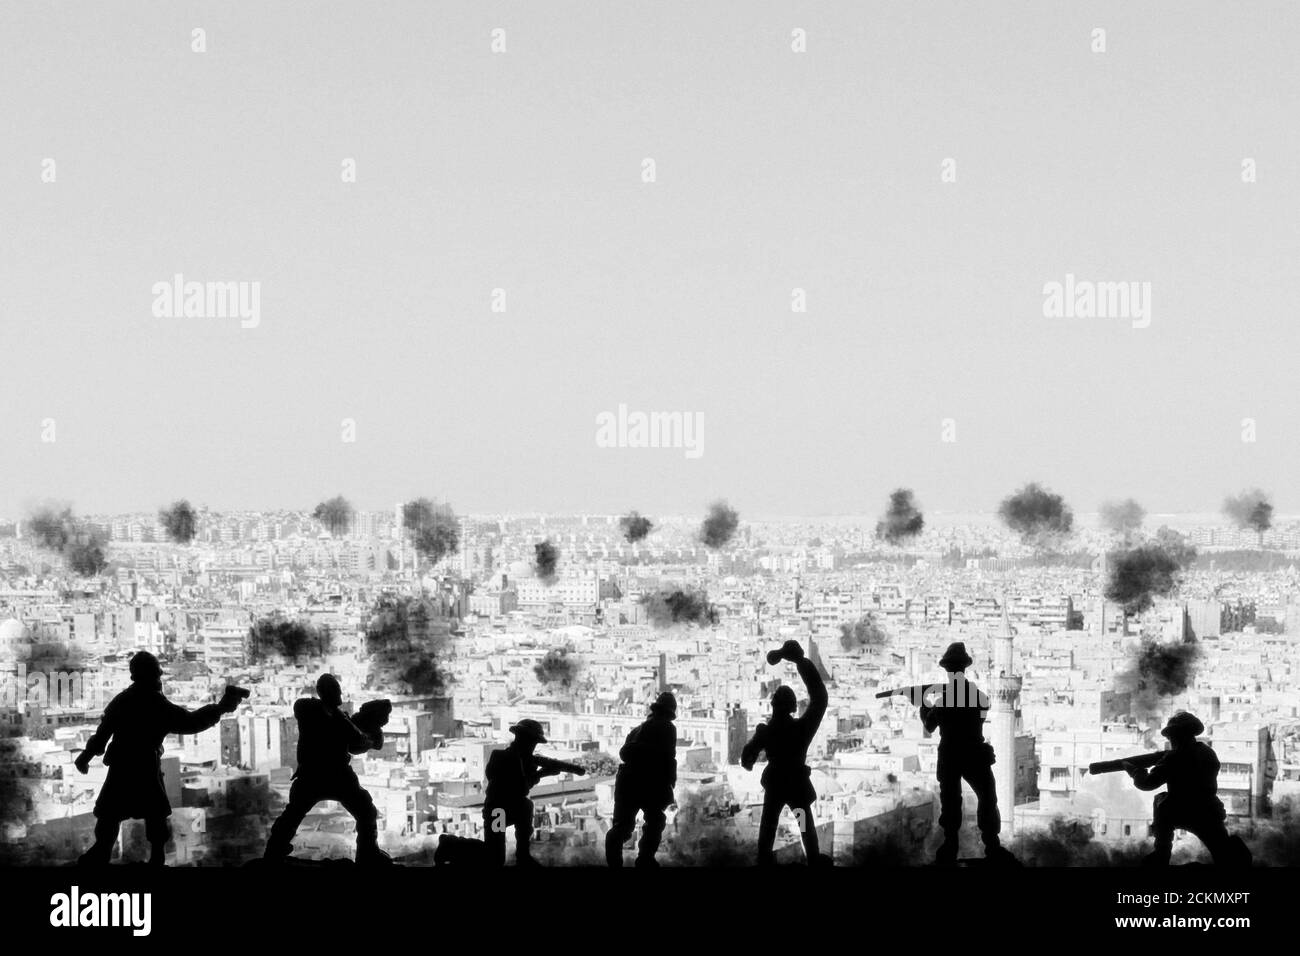 War concept. Military silhouettes fighting scene  background, Civil war soldiers silhouettes attack scene in a arab desert town. Stock Photo